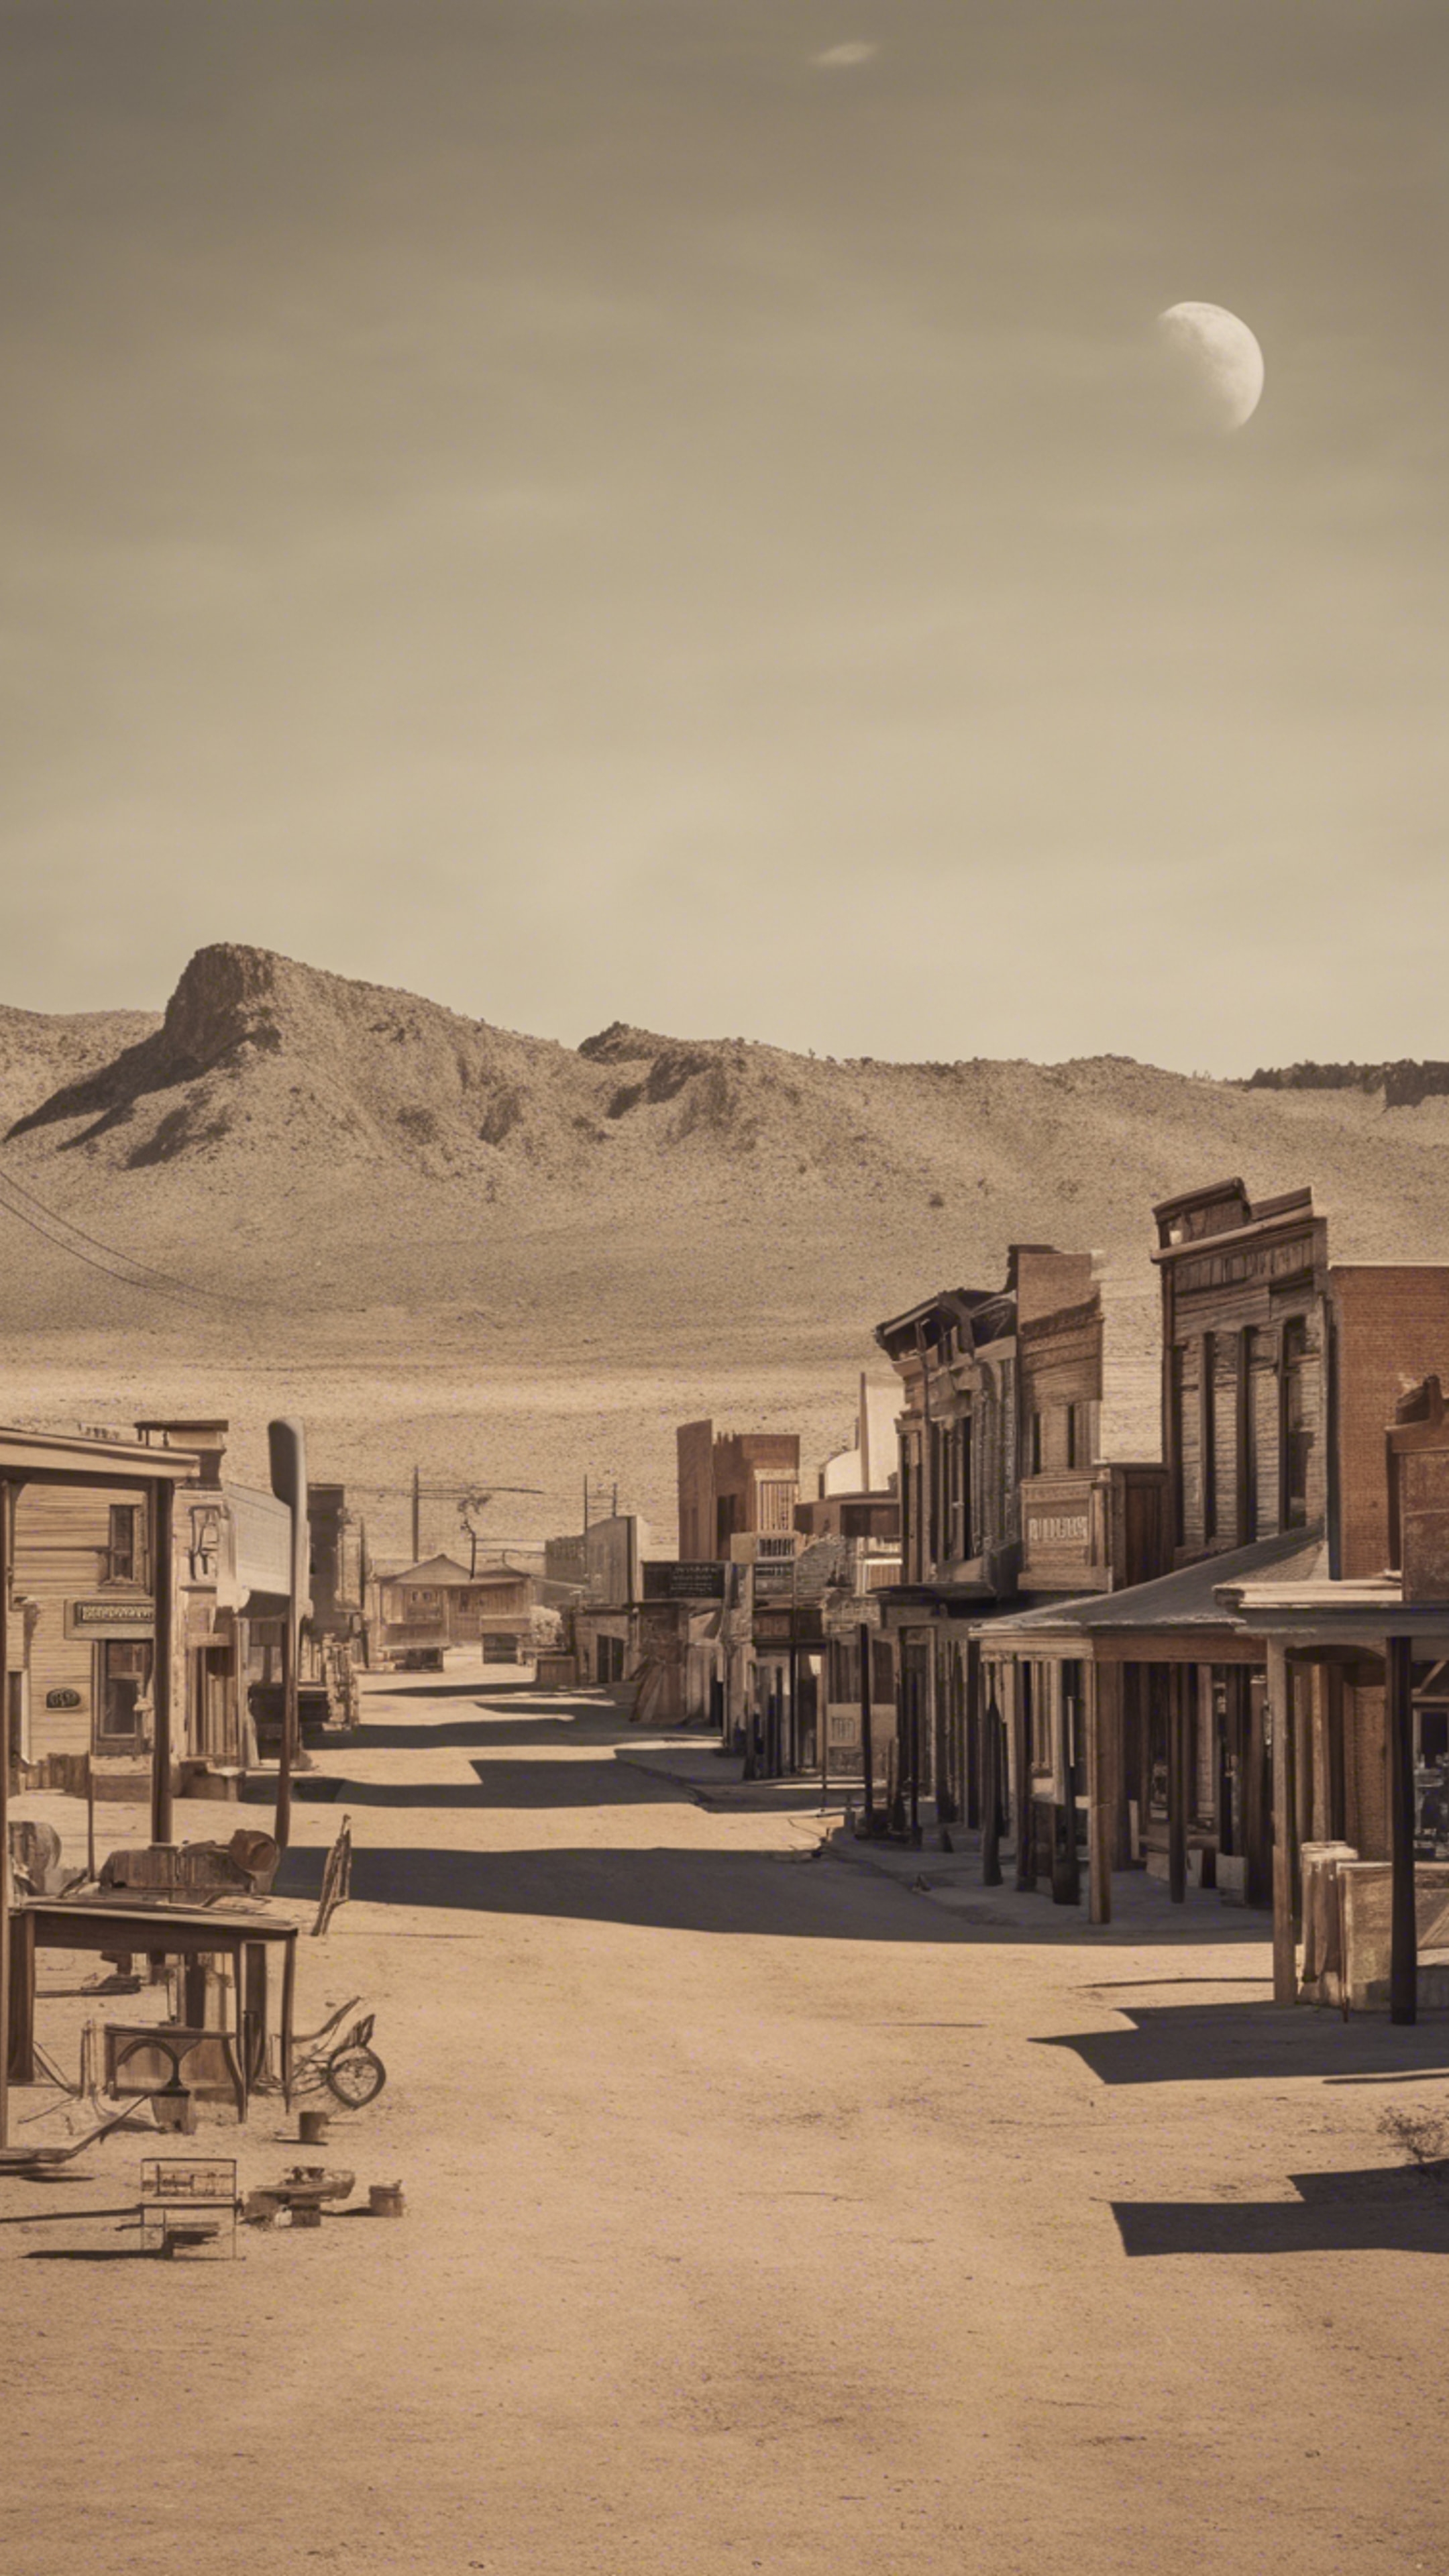 A nostalgic portrayal of a deserted old western town skyline at high noon. 벽지[6f3773f399464a7985e4]